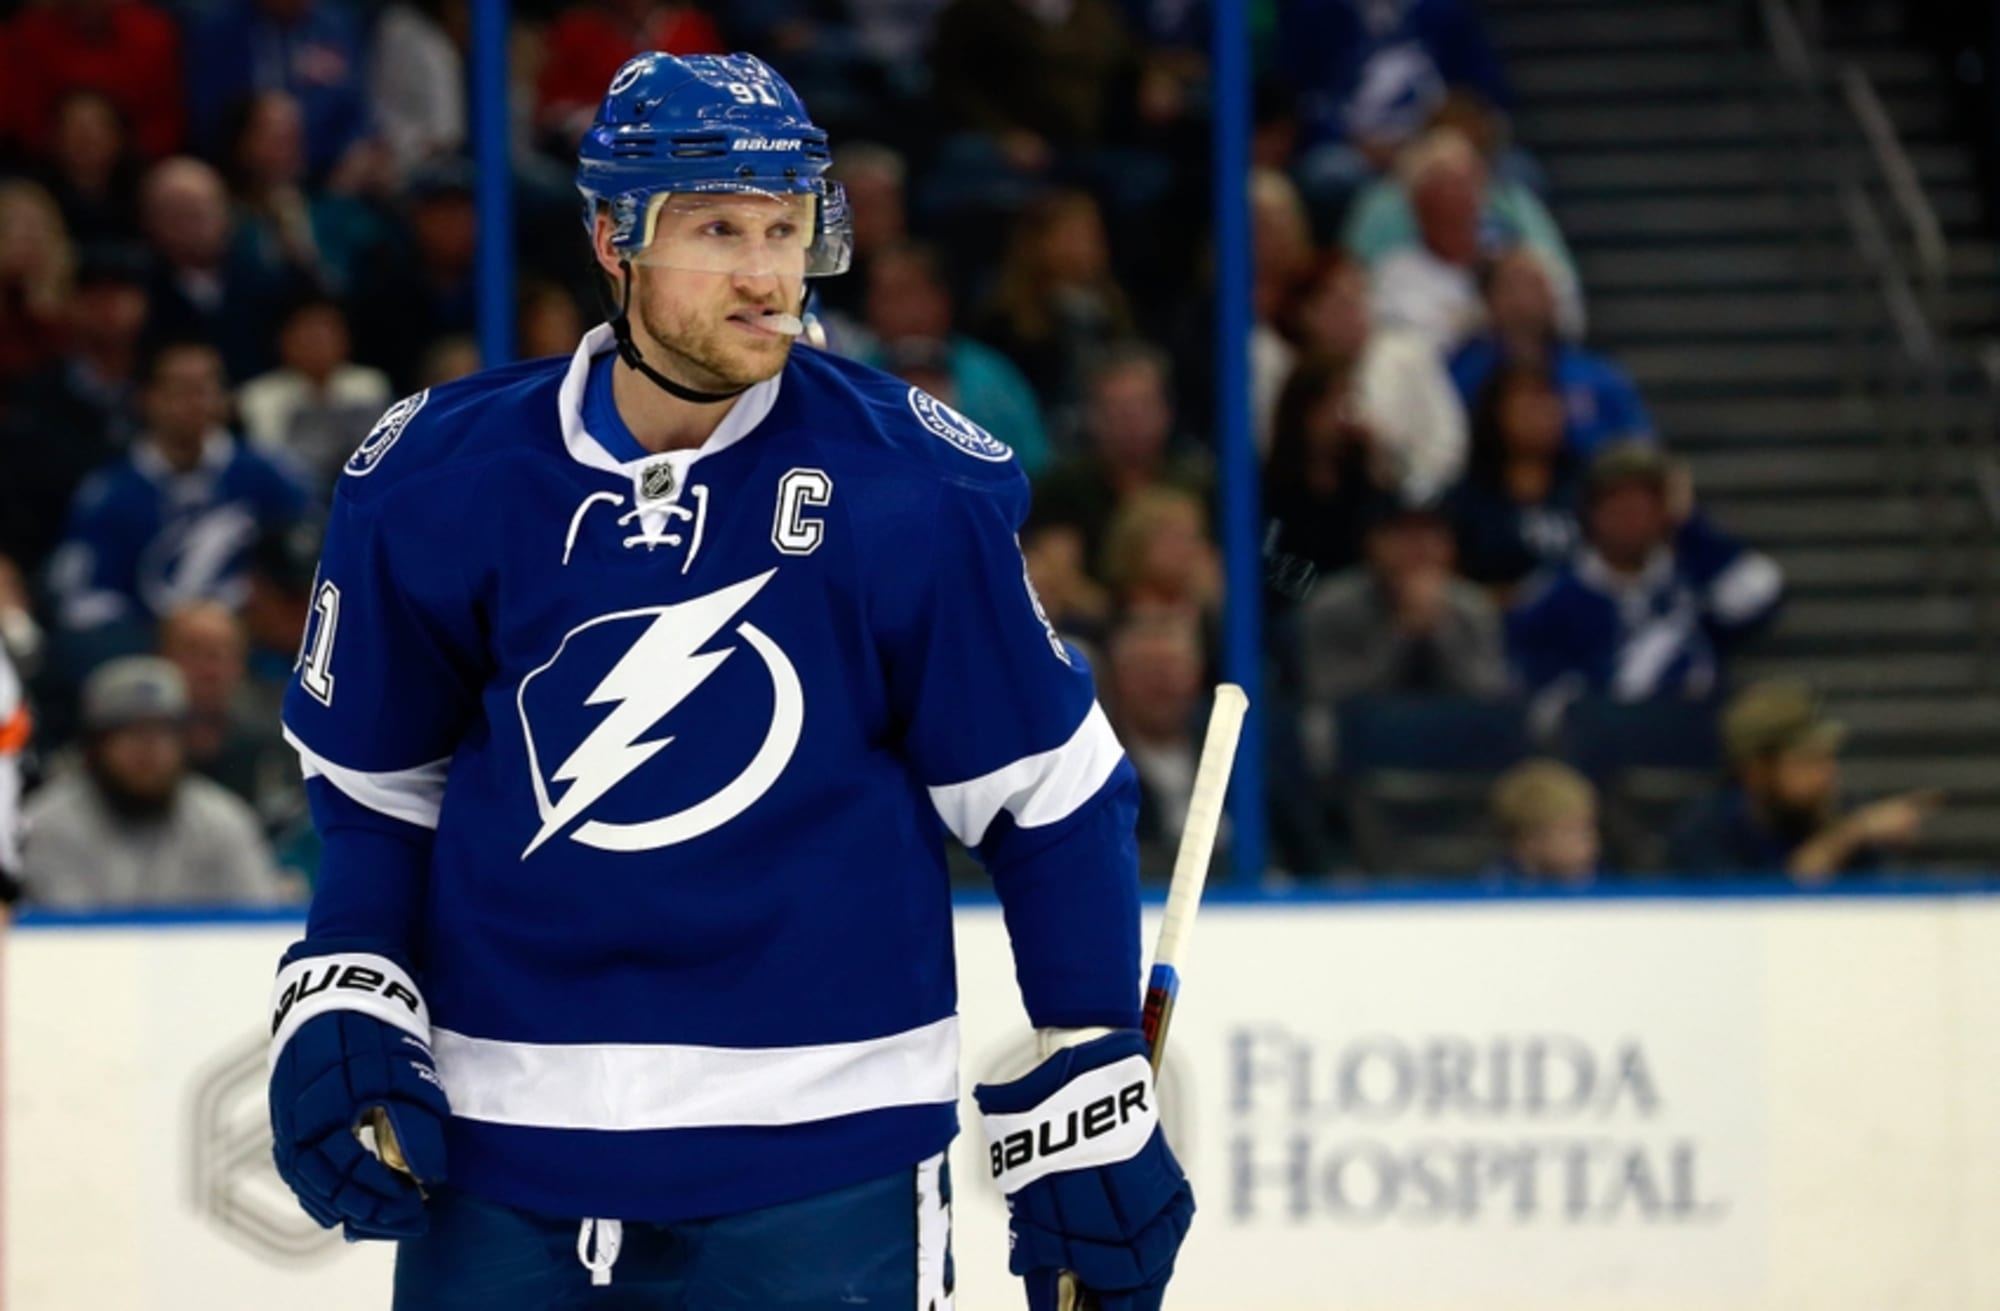 Did Stamkos deserve contract negotiations from Lightning in